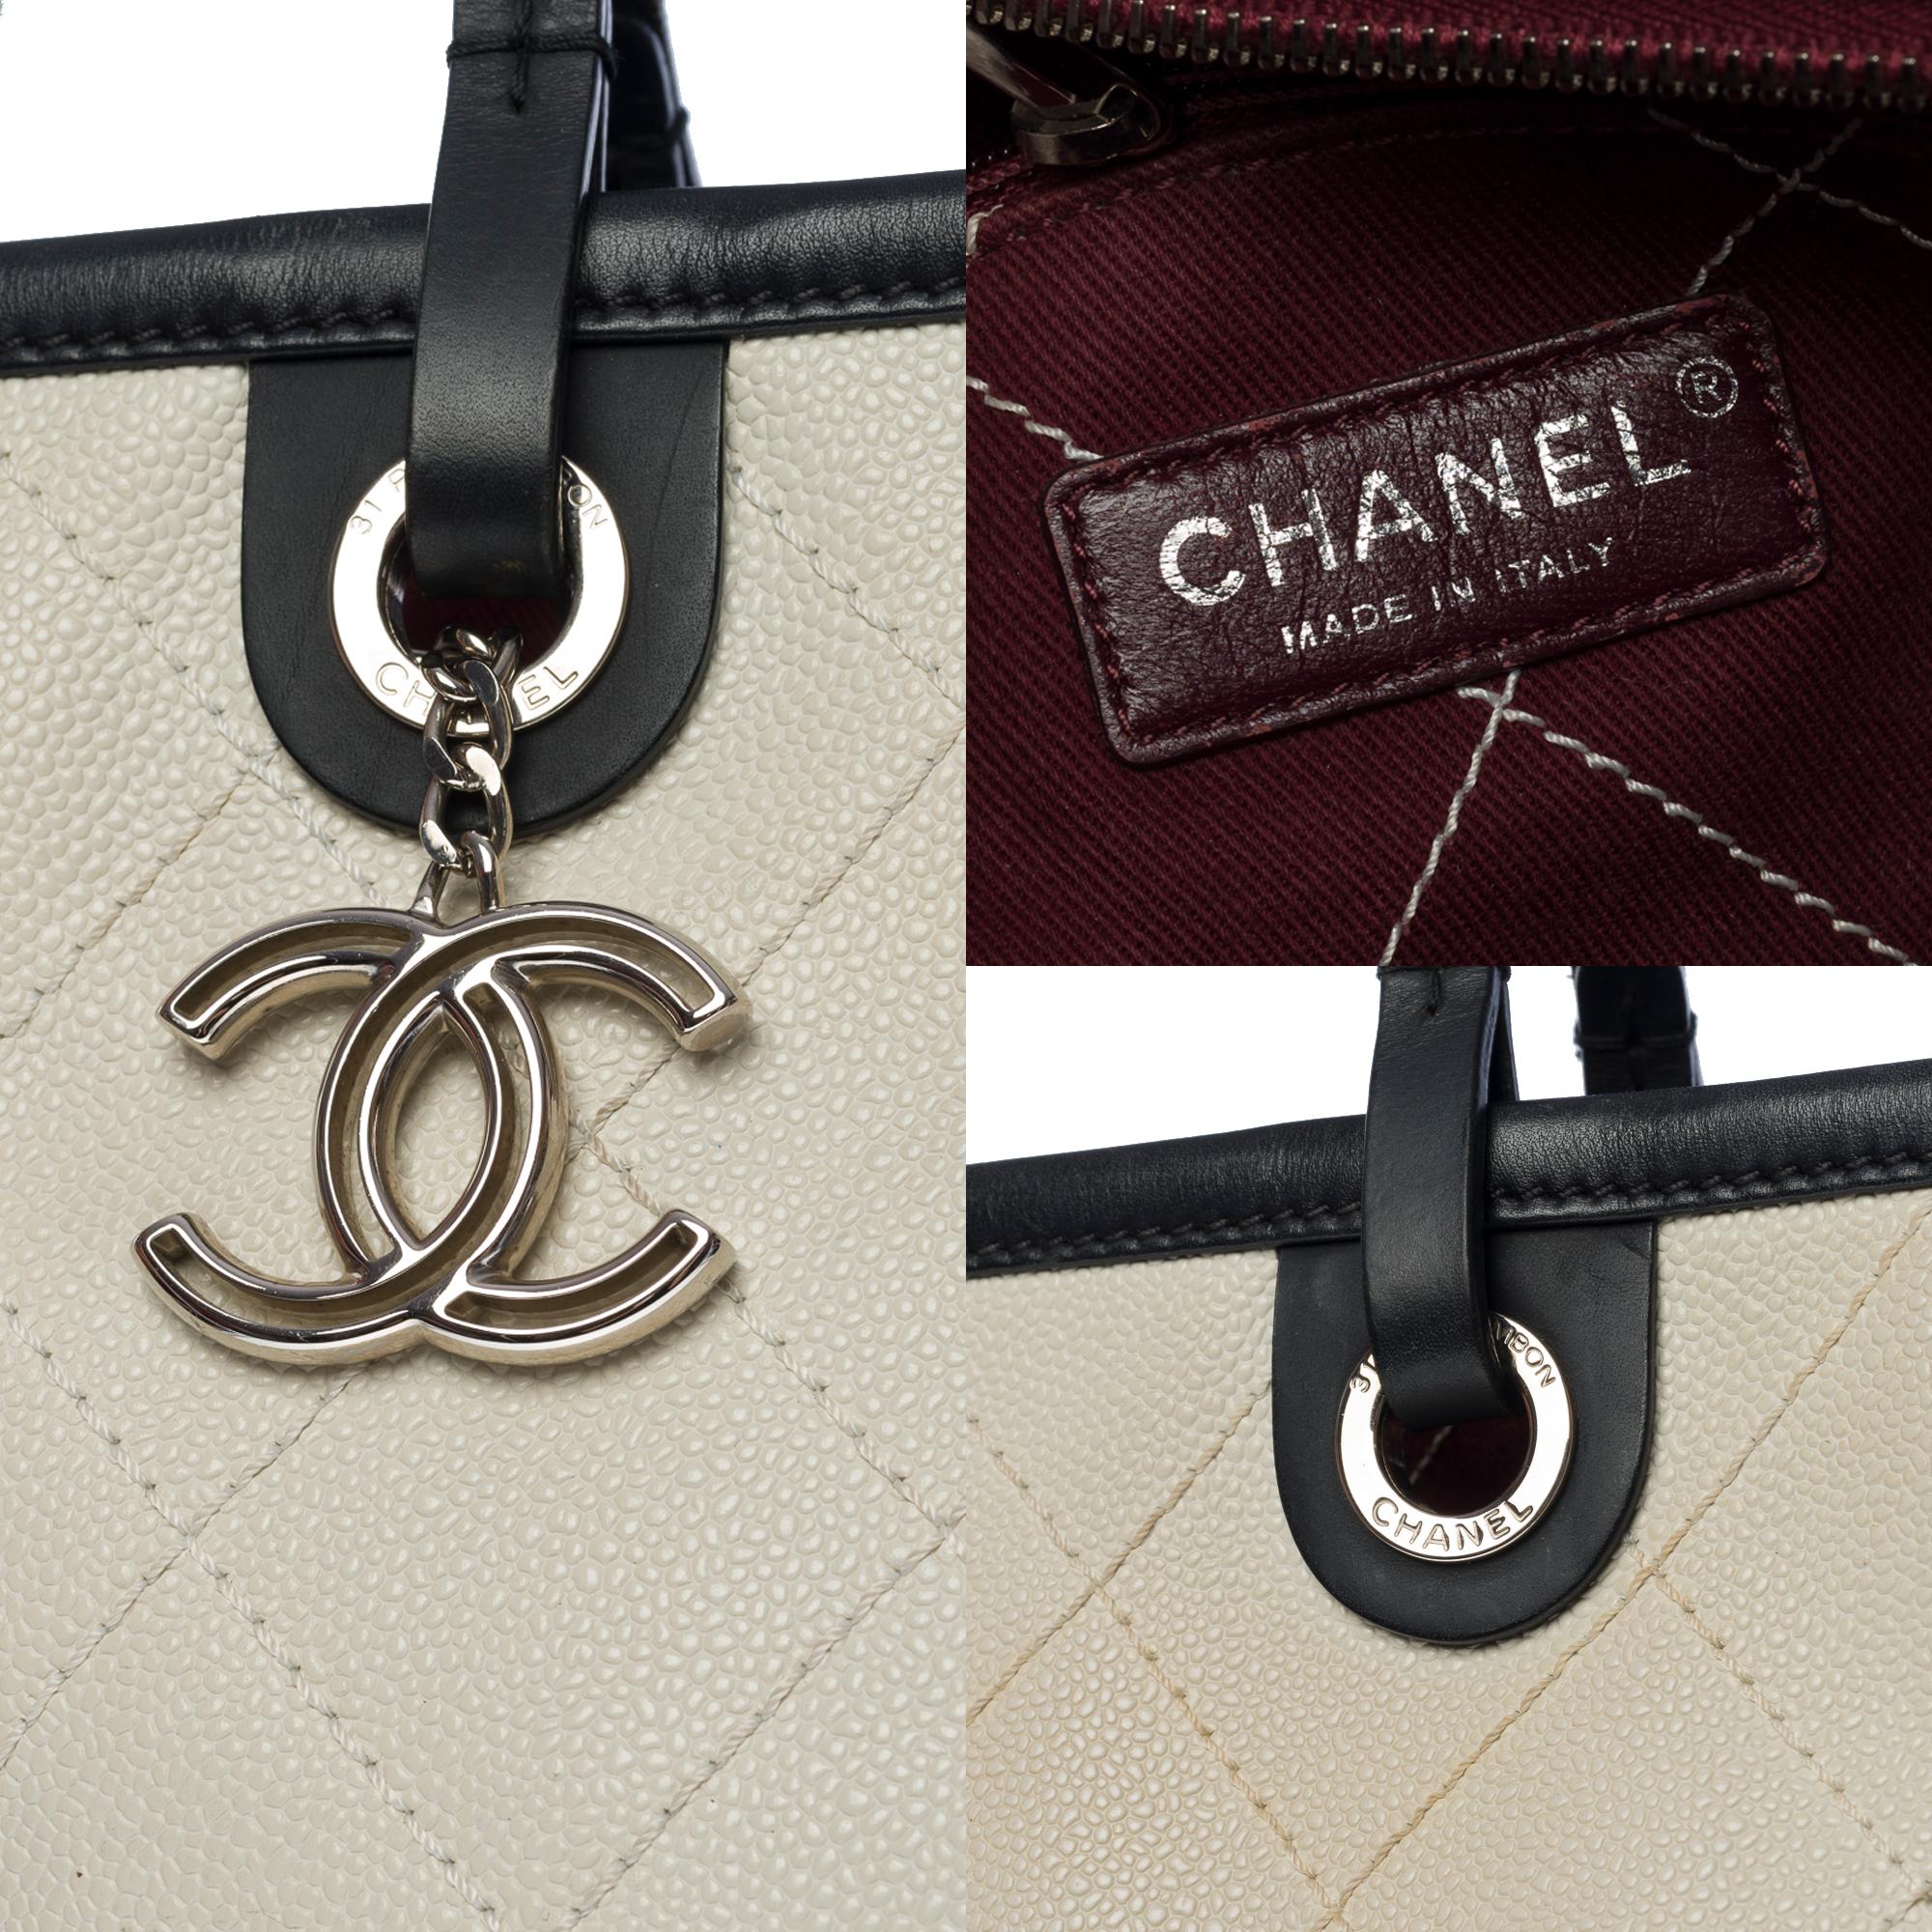 Amazing Chanel Shopping Tote bag in White Caviar quilted leather, SHW In Good Condition In Paris, IDF